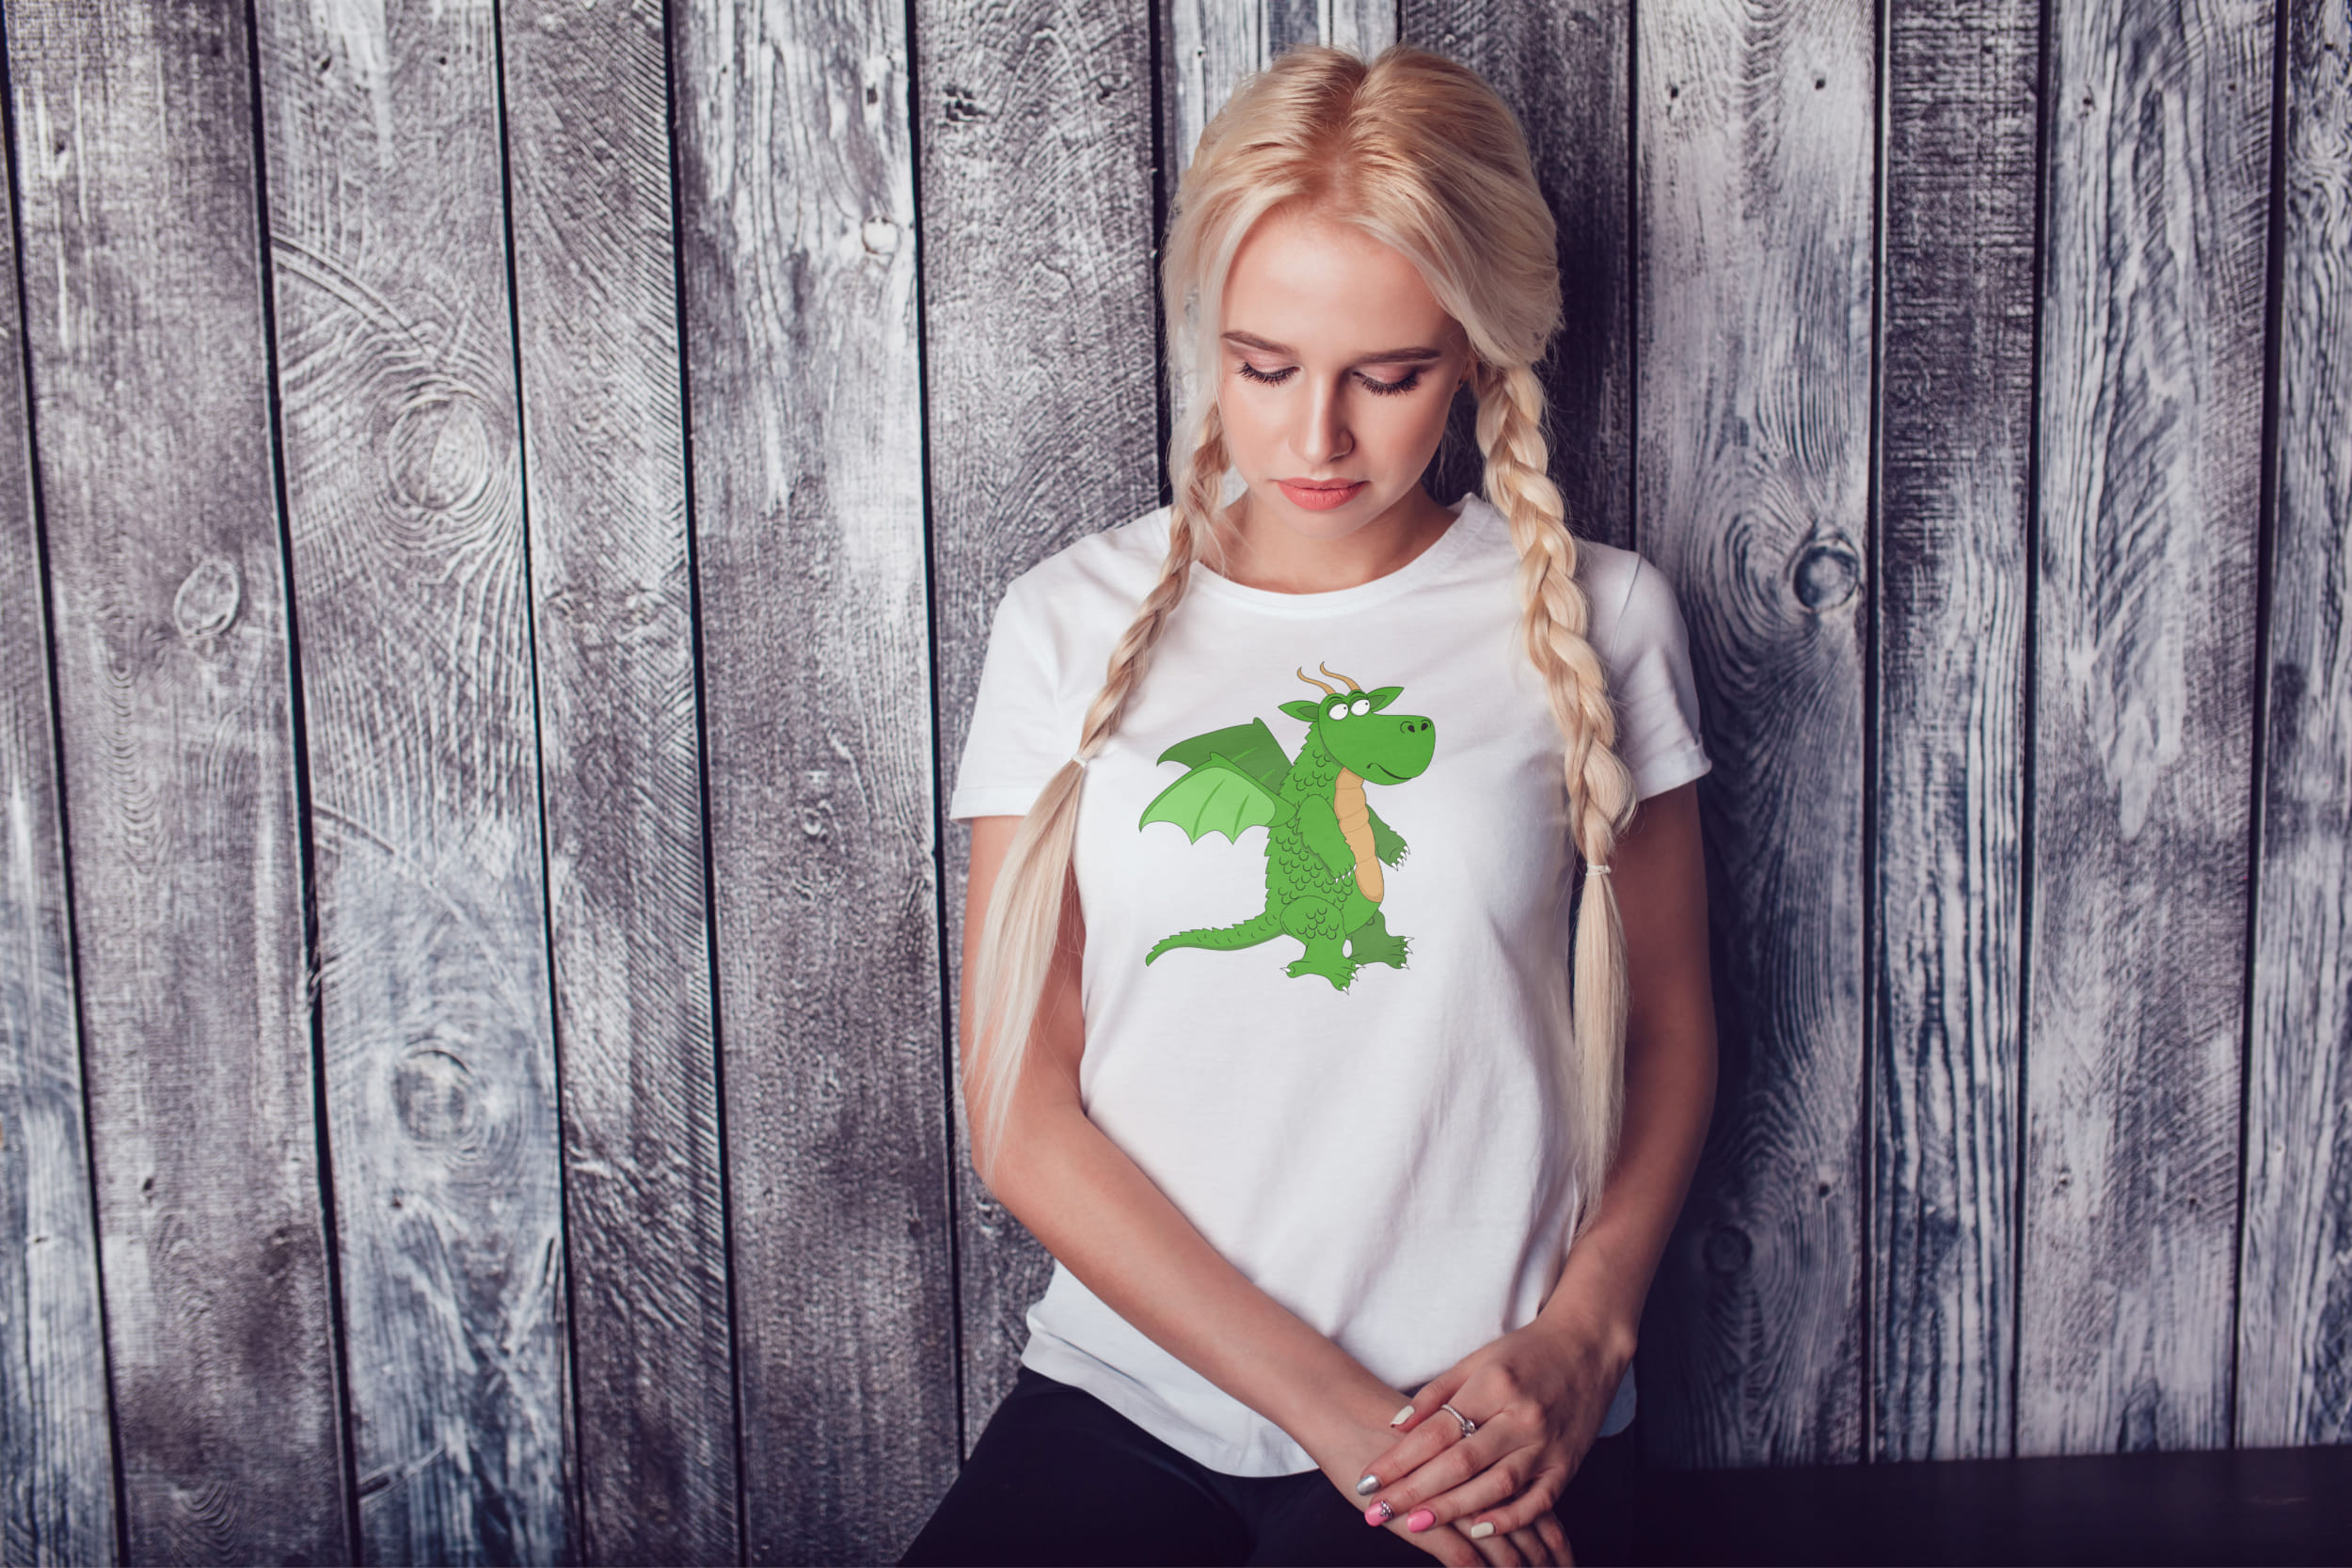 A girl with blond hair and a white T-shirt with a light green dragon.